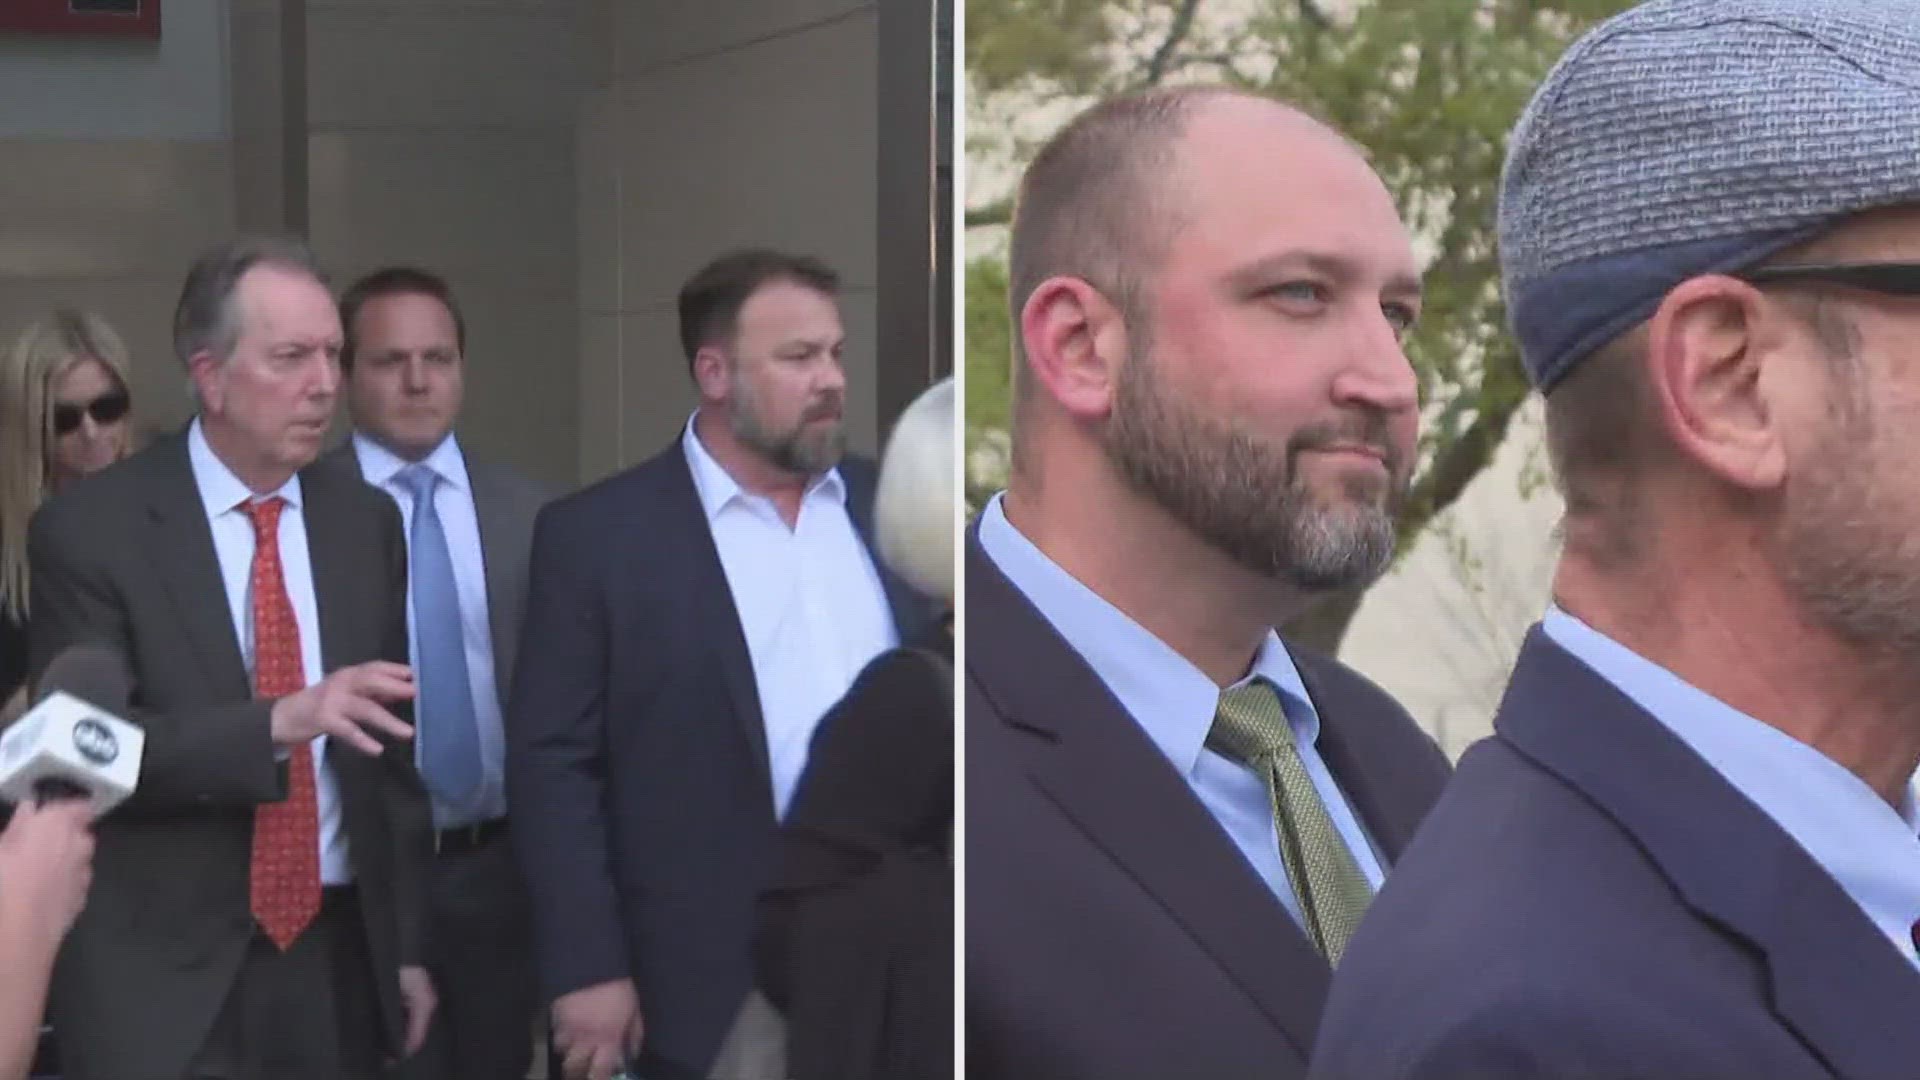 The verdict in the four week trial came in Friday afternoon with former JEA CEO Aaron Zahn found guilty on two charges and ex-CFO Ryan Wannemacher not guilty